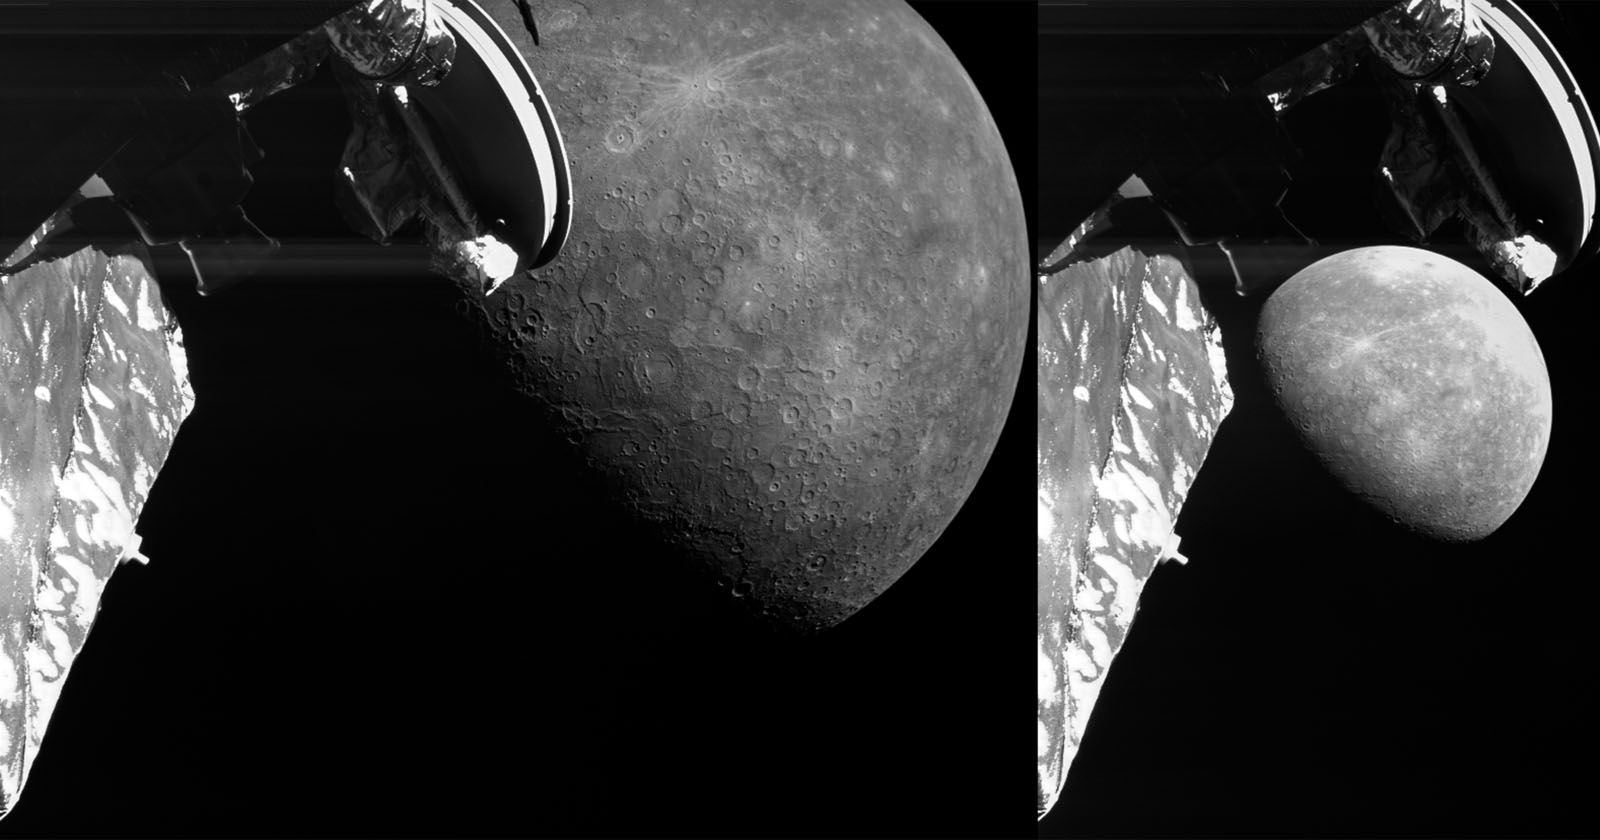  close flyby mercury reveals craters volcanic 